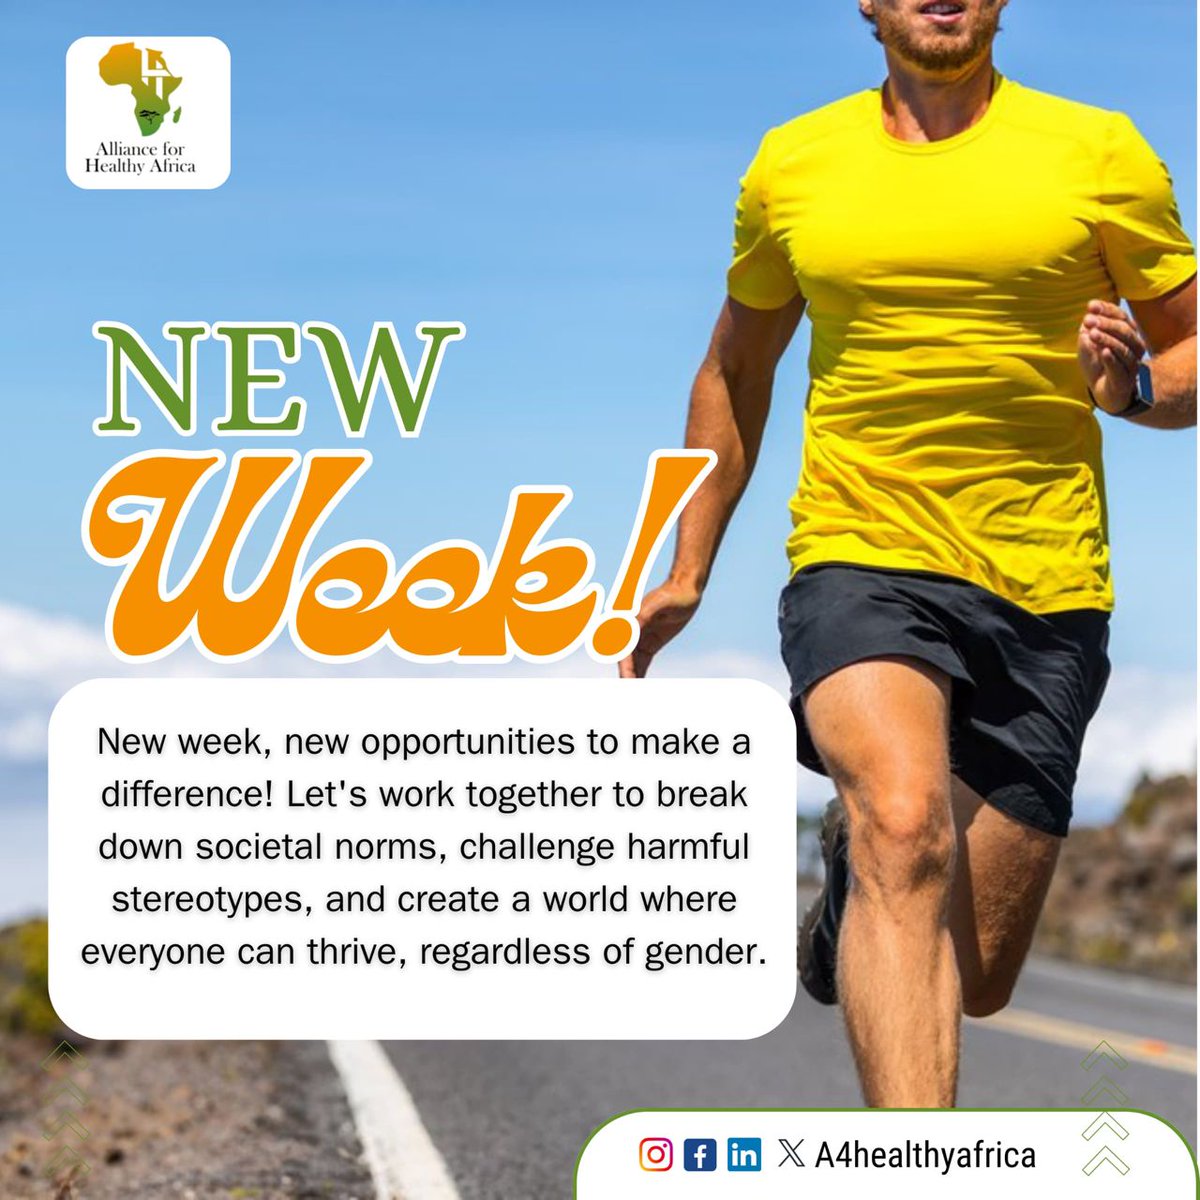 New week, new opportunities to challenge stereotypes and build a world where everyone thrives. Join us! #BreakTheNorms
#HappyNewWeek 
#stayhealthy